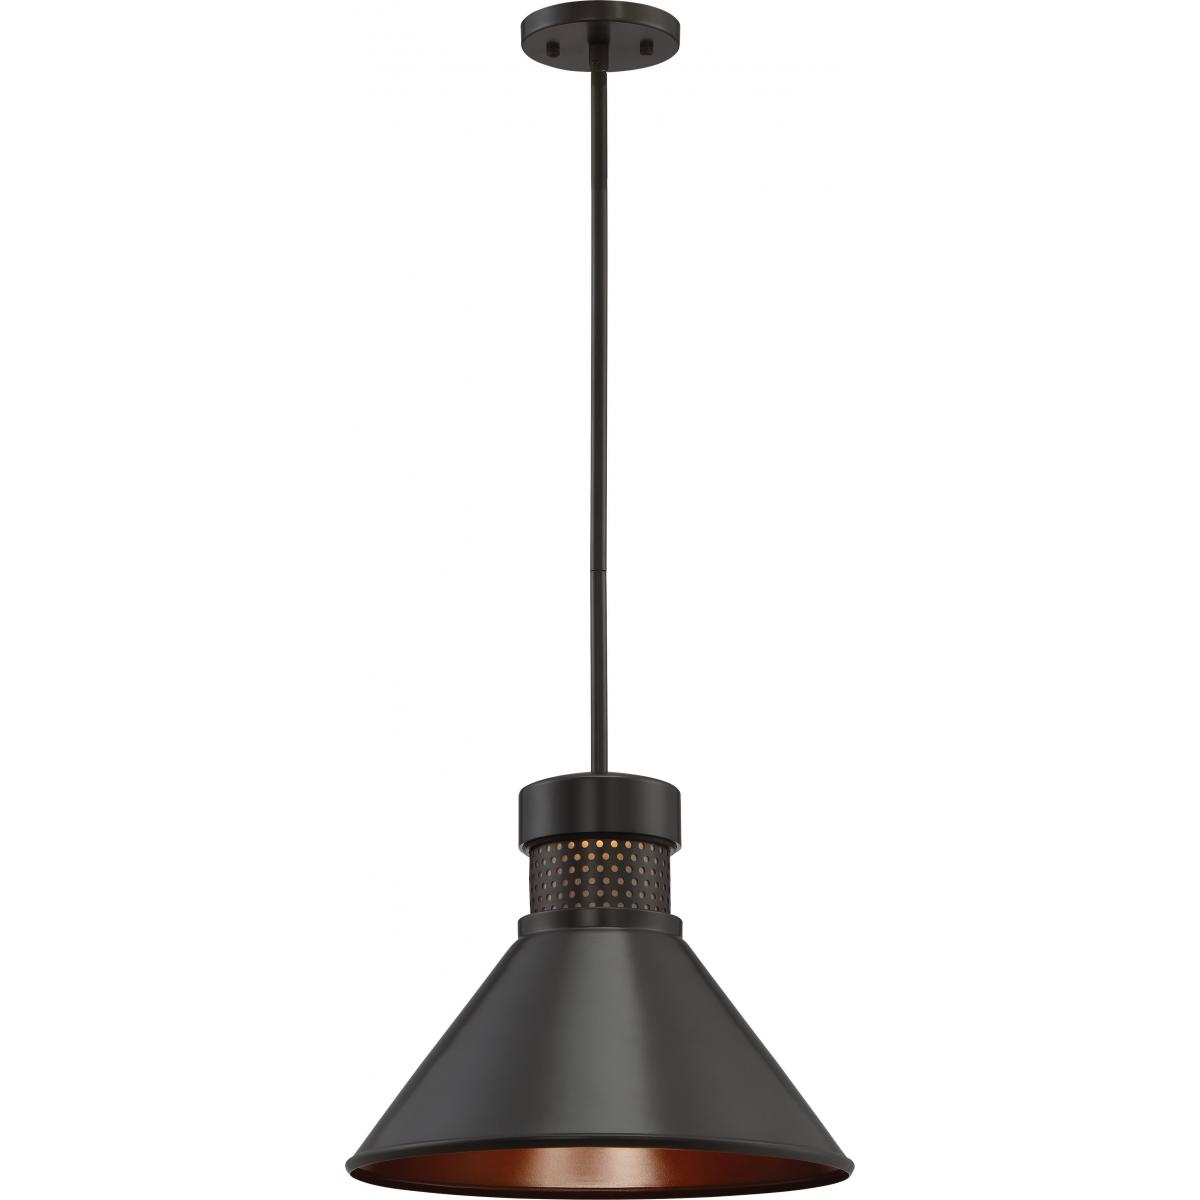 Doral - 1 Light Large LED Pendant with Dark Bronze Finish - Copper Accents